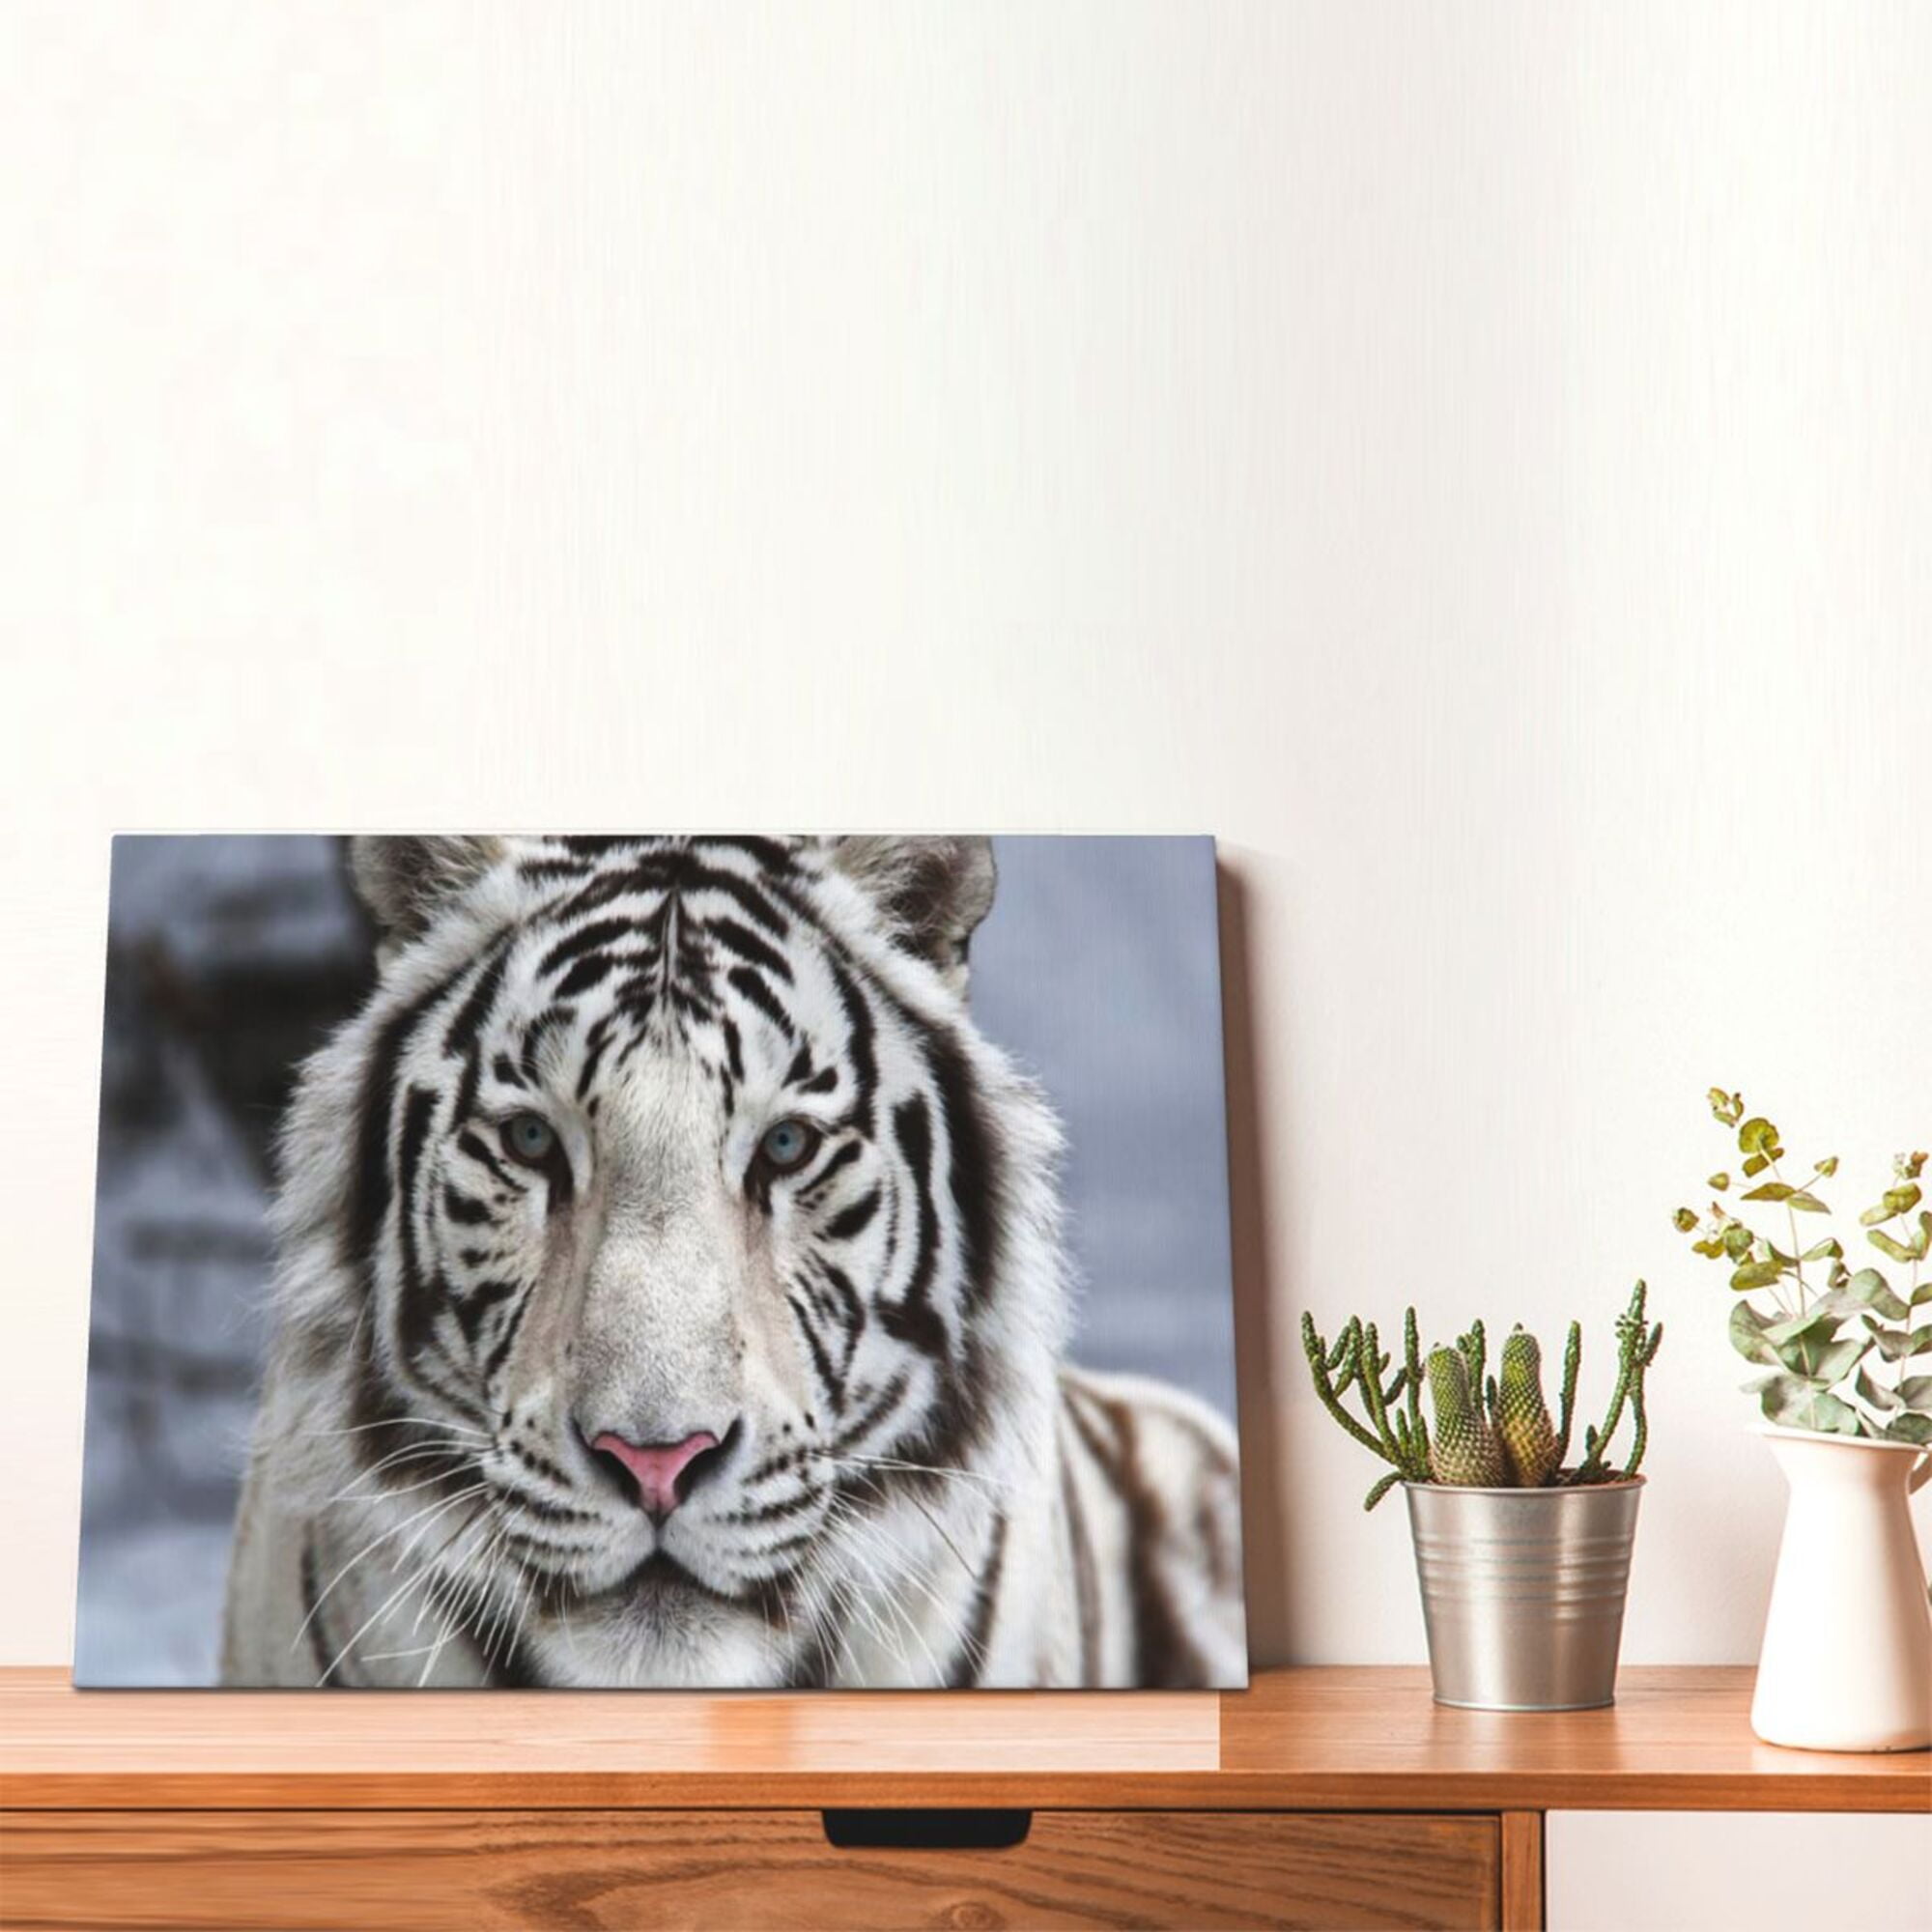 Decor White Tiger Wall Bathroom Room Canvas Bedroom 12x16in Bathroom Living Decor Decorations Artwork Modern Framed For Painting